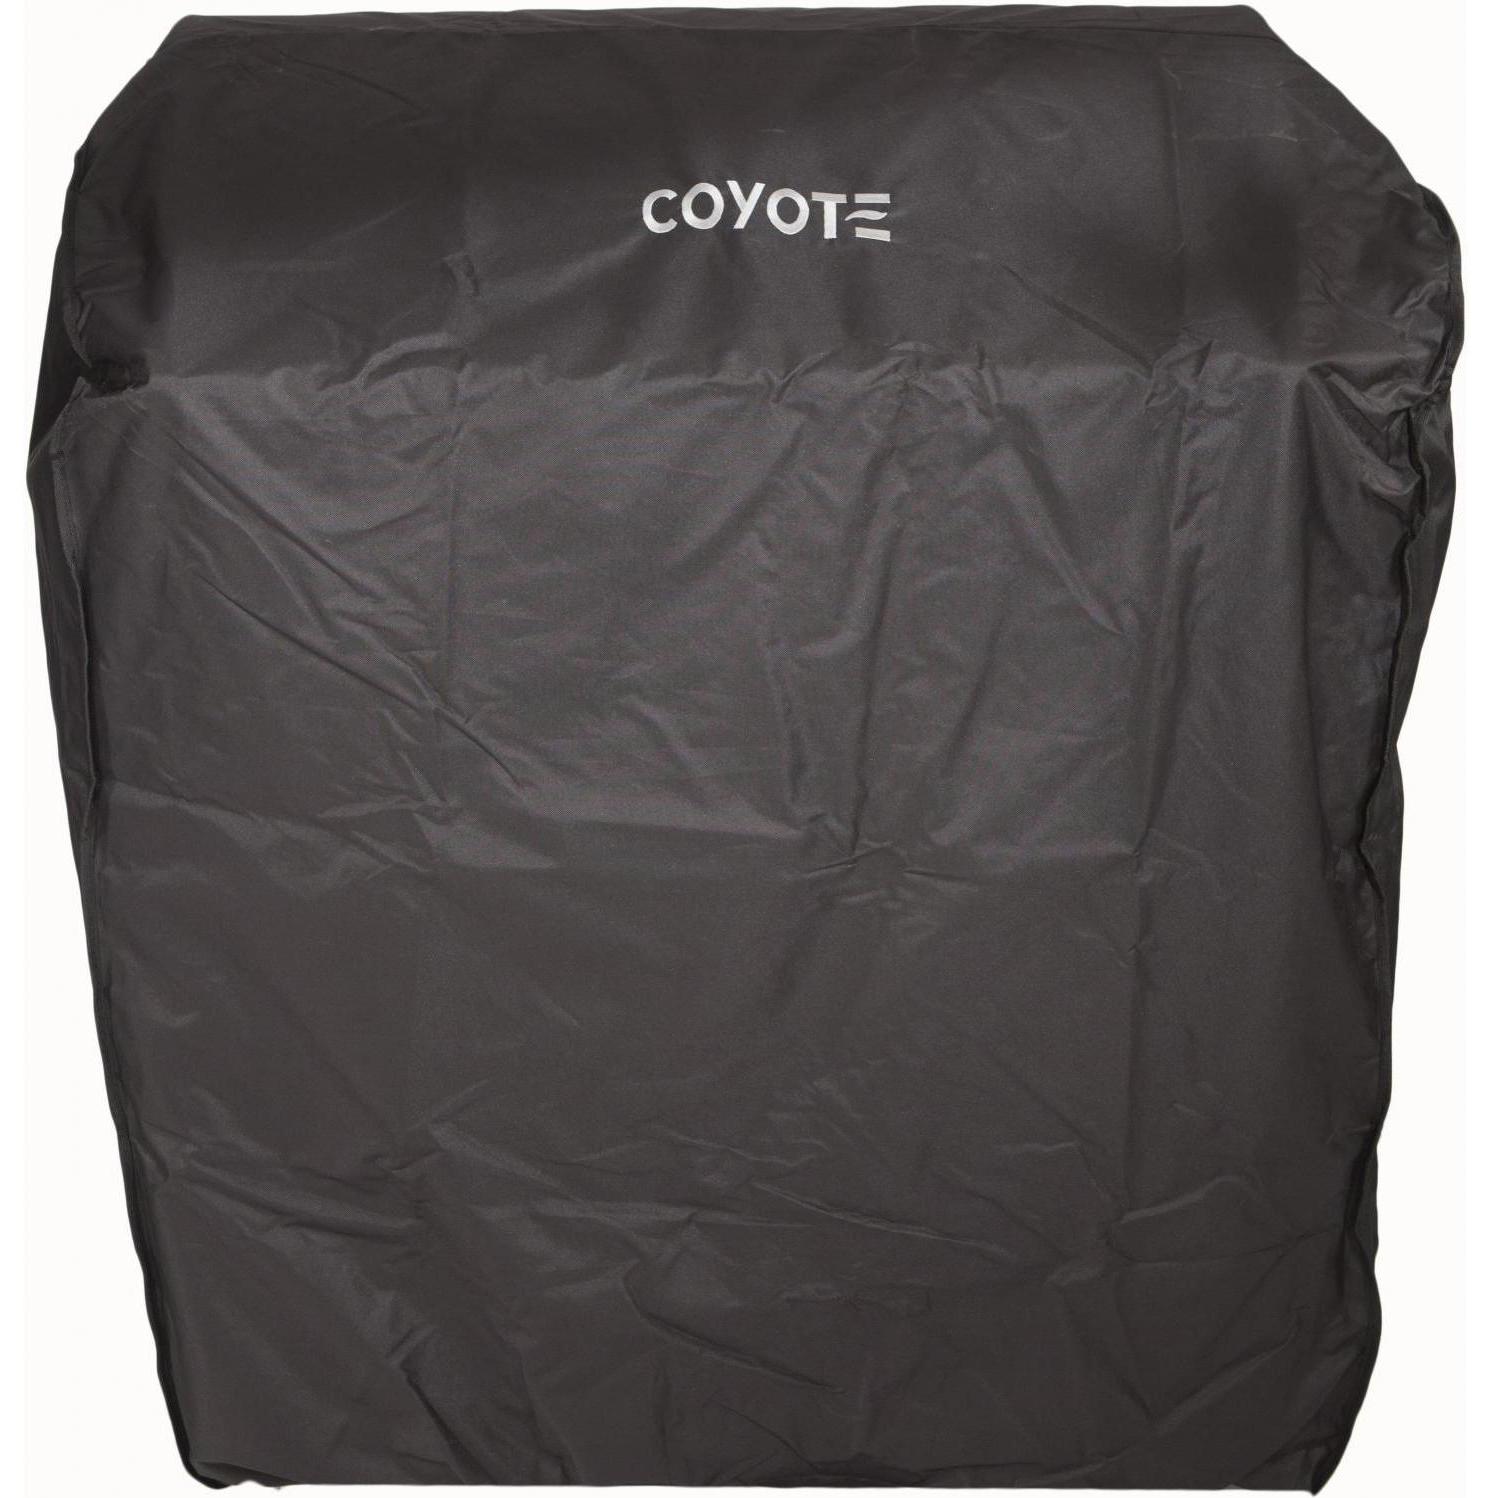 Coyote Outdoor Living 36” Grill Cover-Black